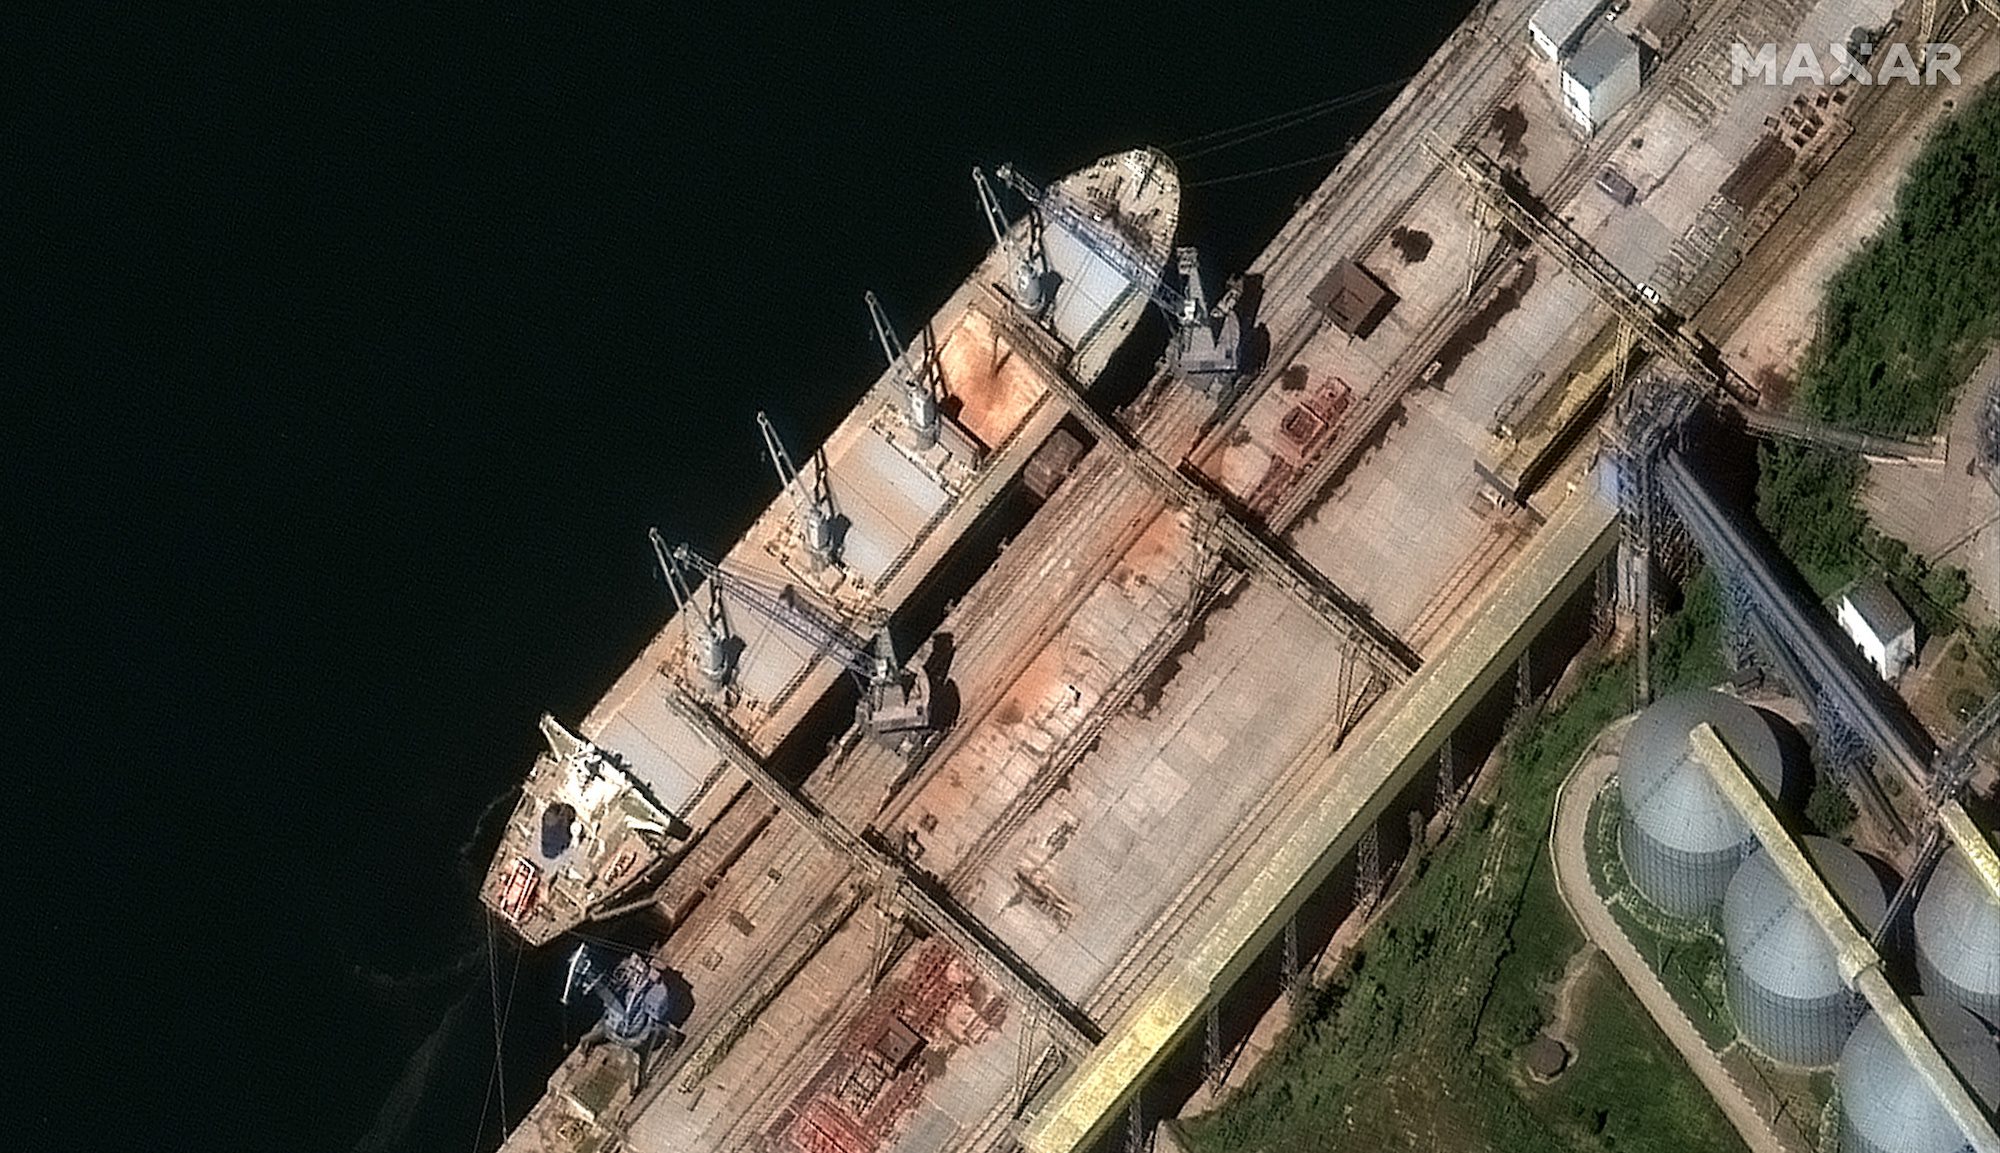 A satellite image shows a closeup of bulk carrier ship loading grain at the port of Sevastopol, Crimea May 19, 2022